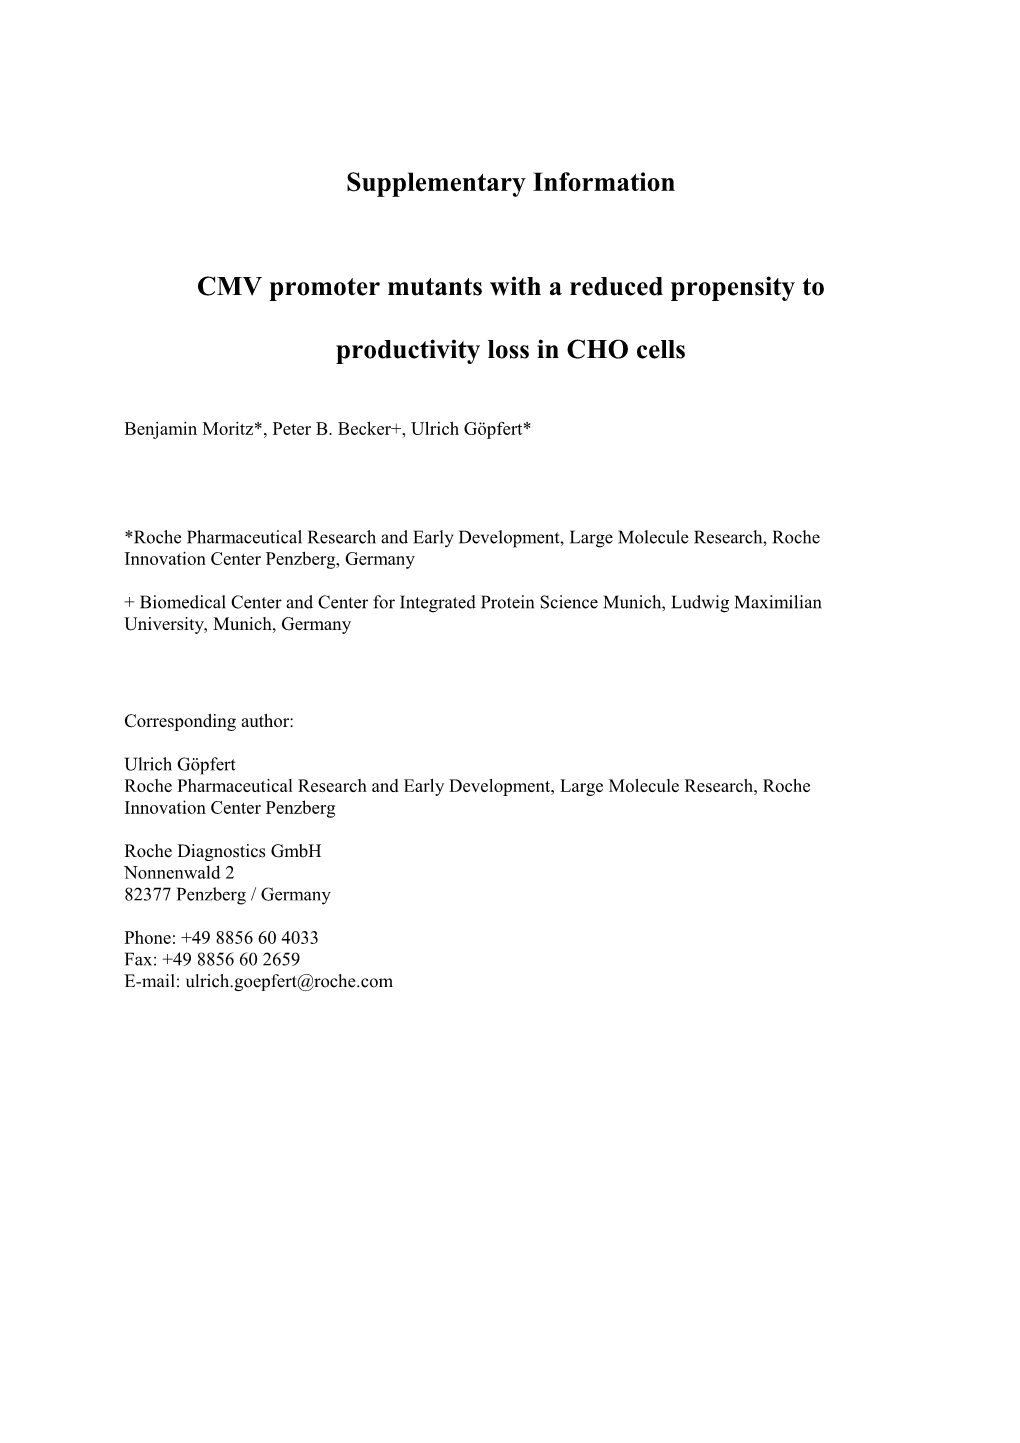 CMV Promoter Mutants with a Reduced Propensity to Productivity Loss in CHO Cells